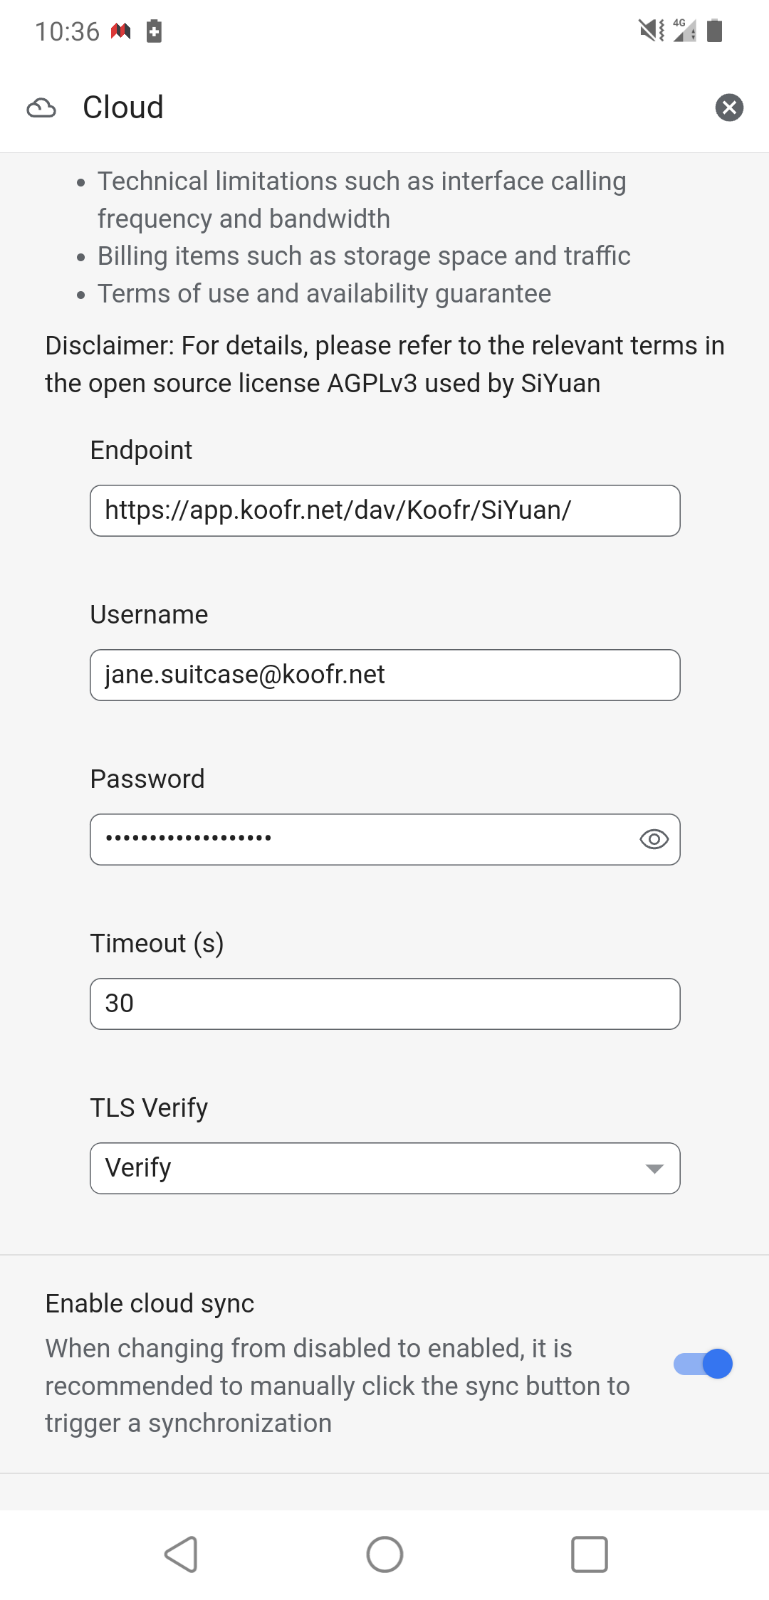 You can use the same endpoint address and credentials to set up WebDAV on mobile devices.